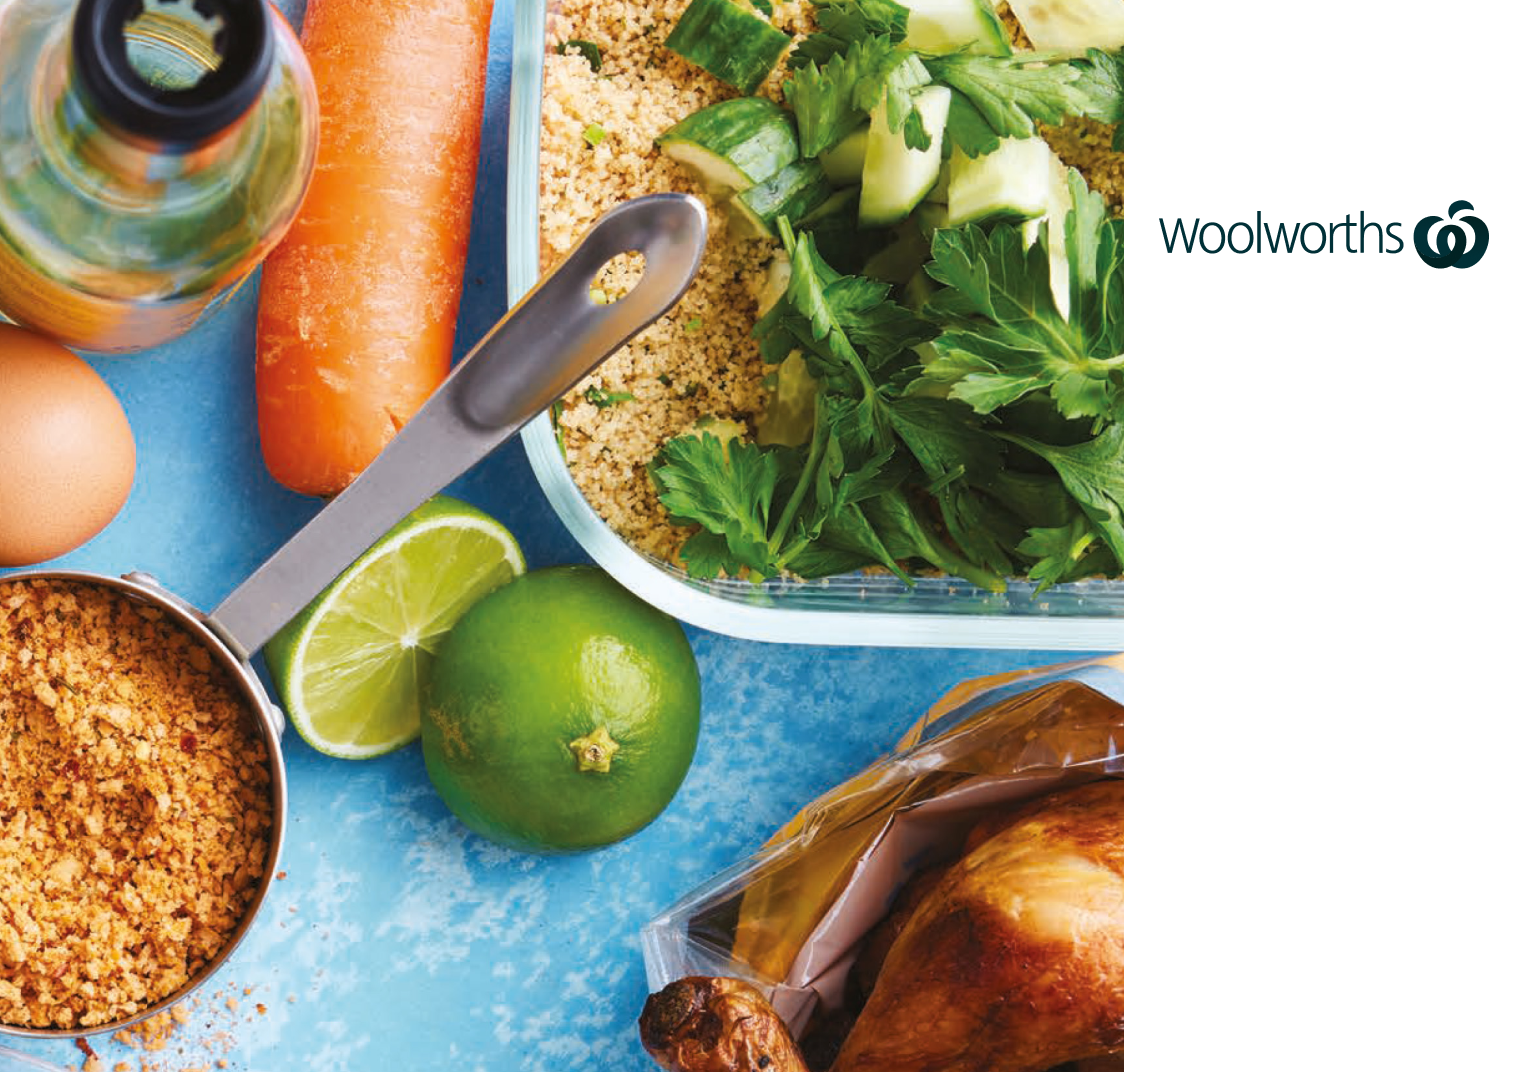 Woolworths is Australia’s largest supermarket chain.